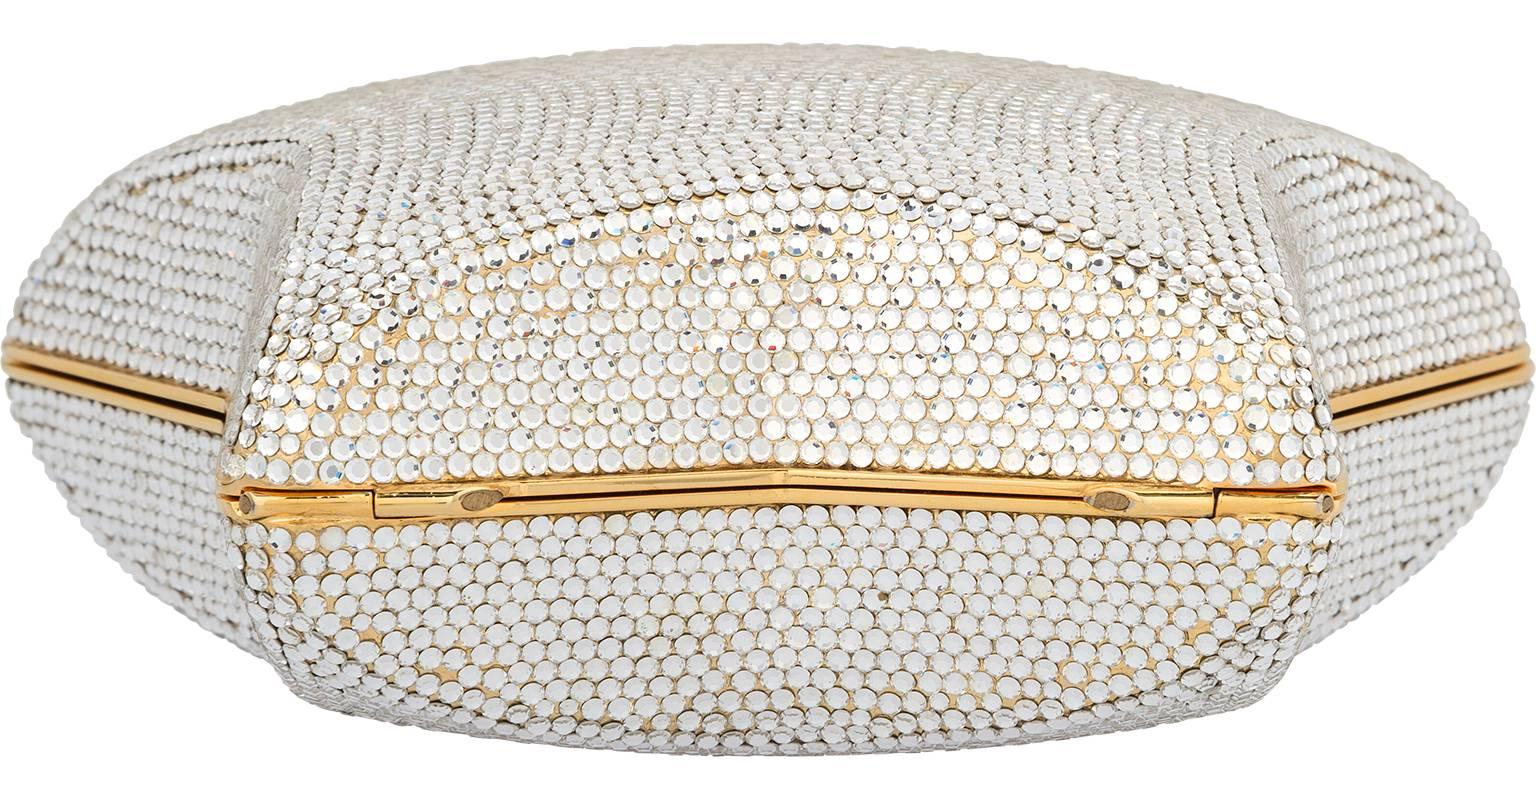 Judith Leiber Full Bead Silver Crystal Star Minaudiere Bag In Excellent Condition For Sale In New York, NY